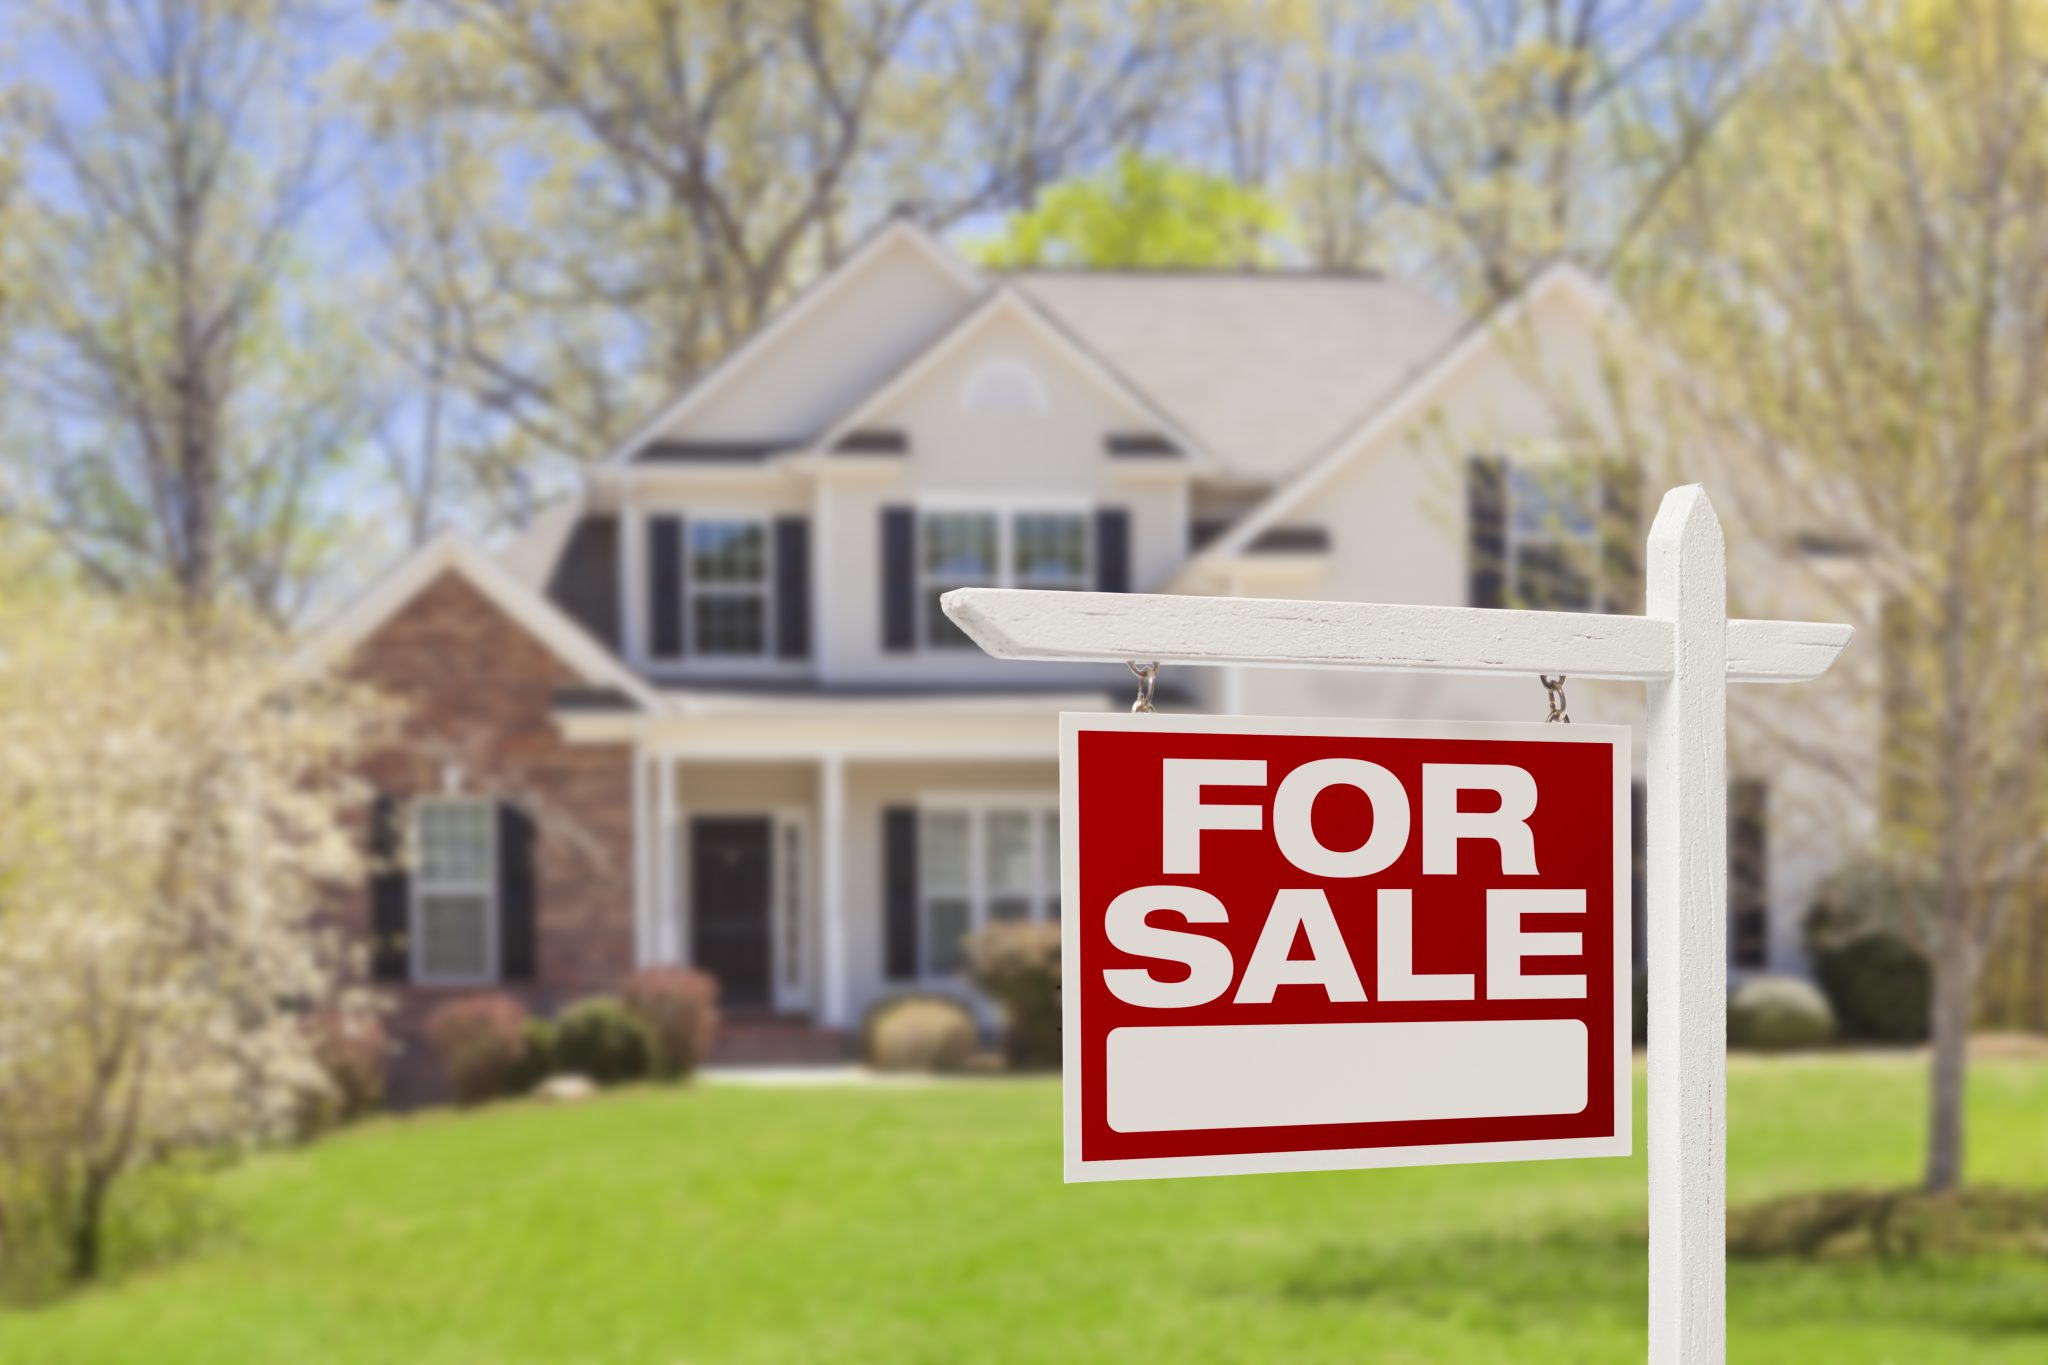 6 Epic Ways to Bungle Selling a Home